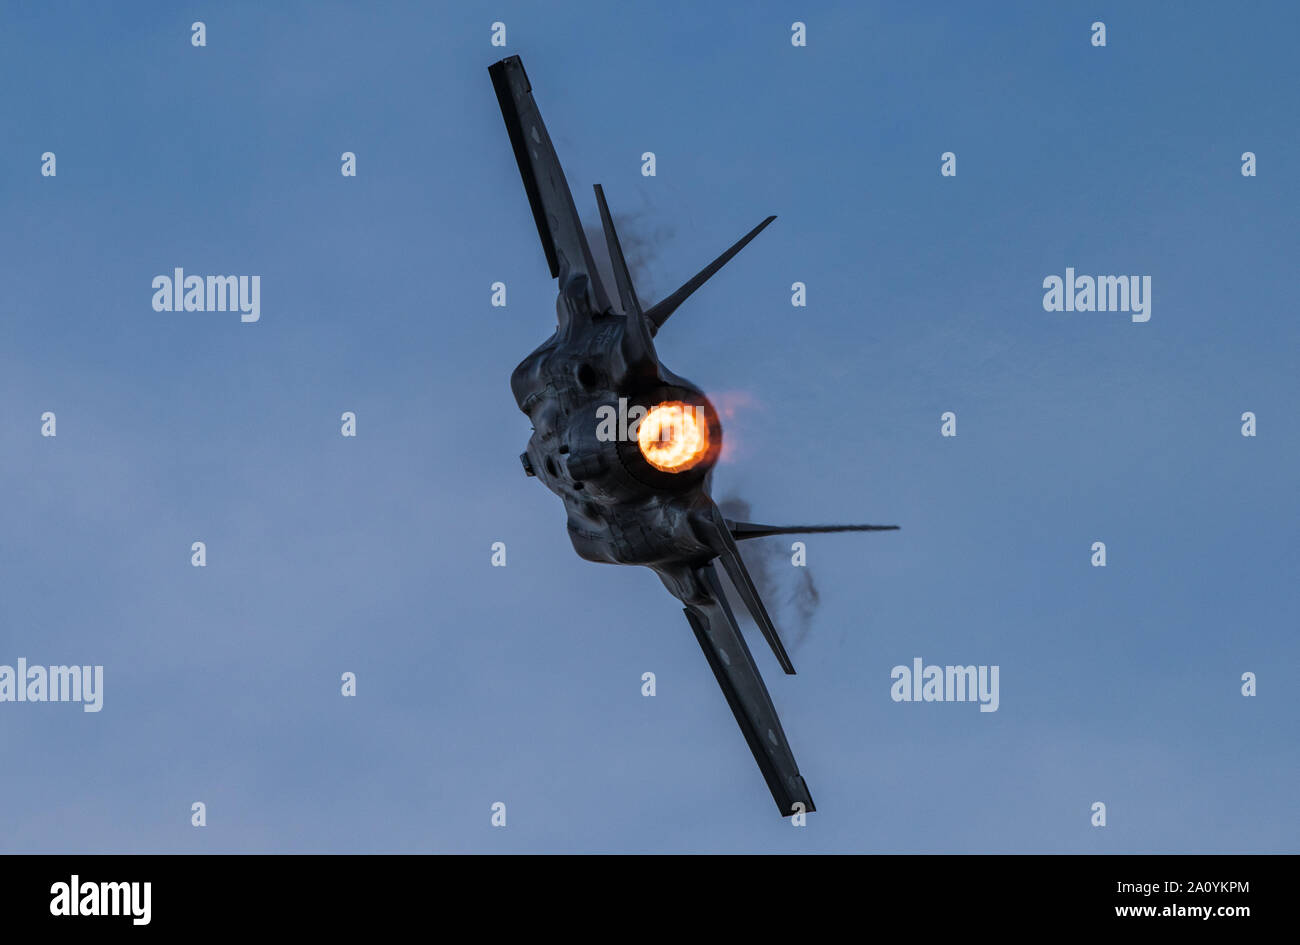 Capt. Andrew 'Dojo' Olson, F-35 Demonstration Team pilot and commander performs aerial maneuvers during a twilight performance at the Oregon International Airshow in McMinnville, OR, Sept. 20, 2019. The demo features 14 maneuvers which showcase the Air Force's newest fifth-generation fighter aircraft. (U.S. Air Force photo by Senior Airman Alexander Cook) Stock Photo